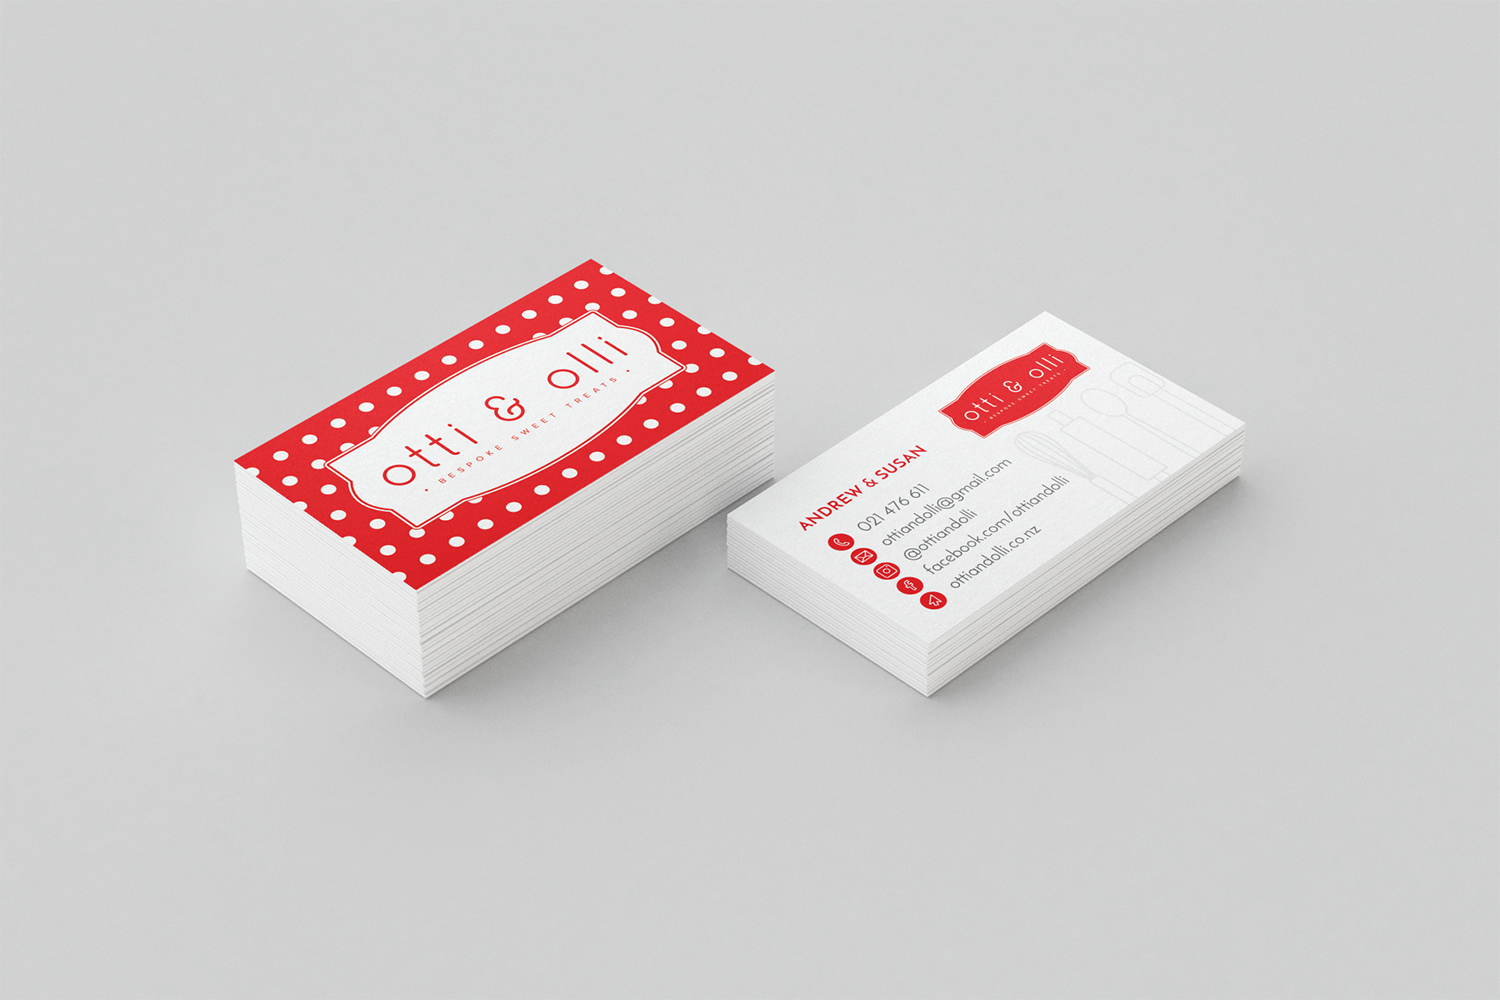 Red and White Polka-Dot Business Cards for Otti and Olli